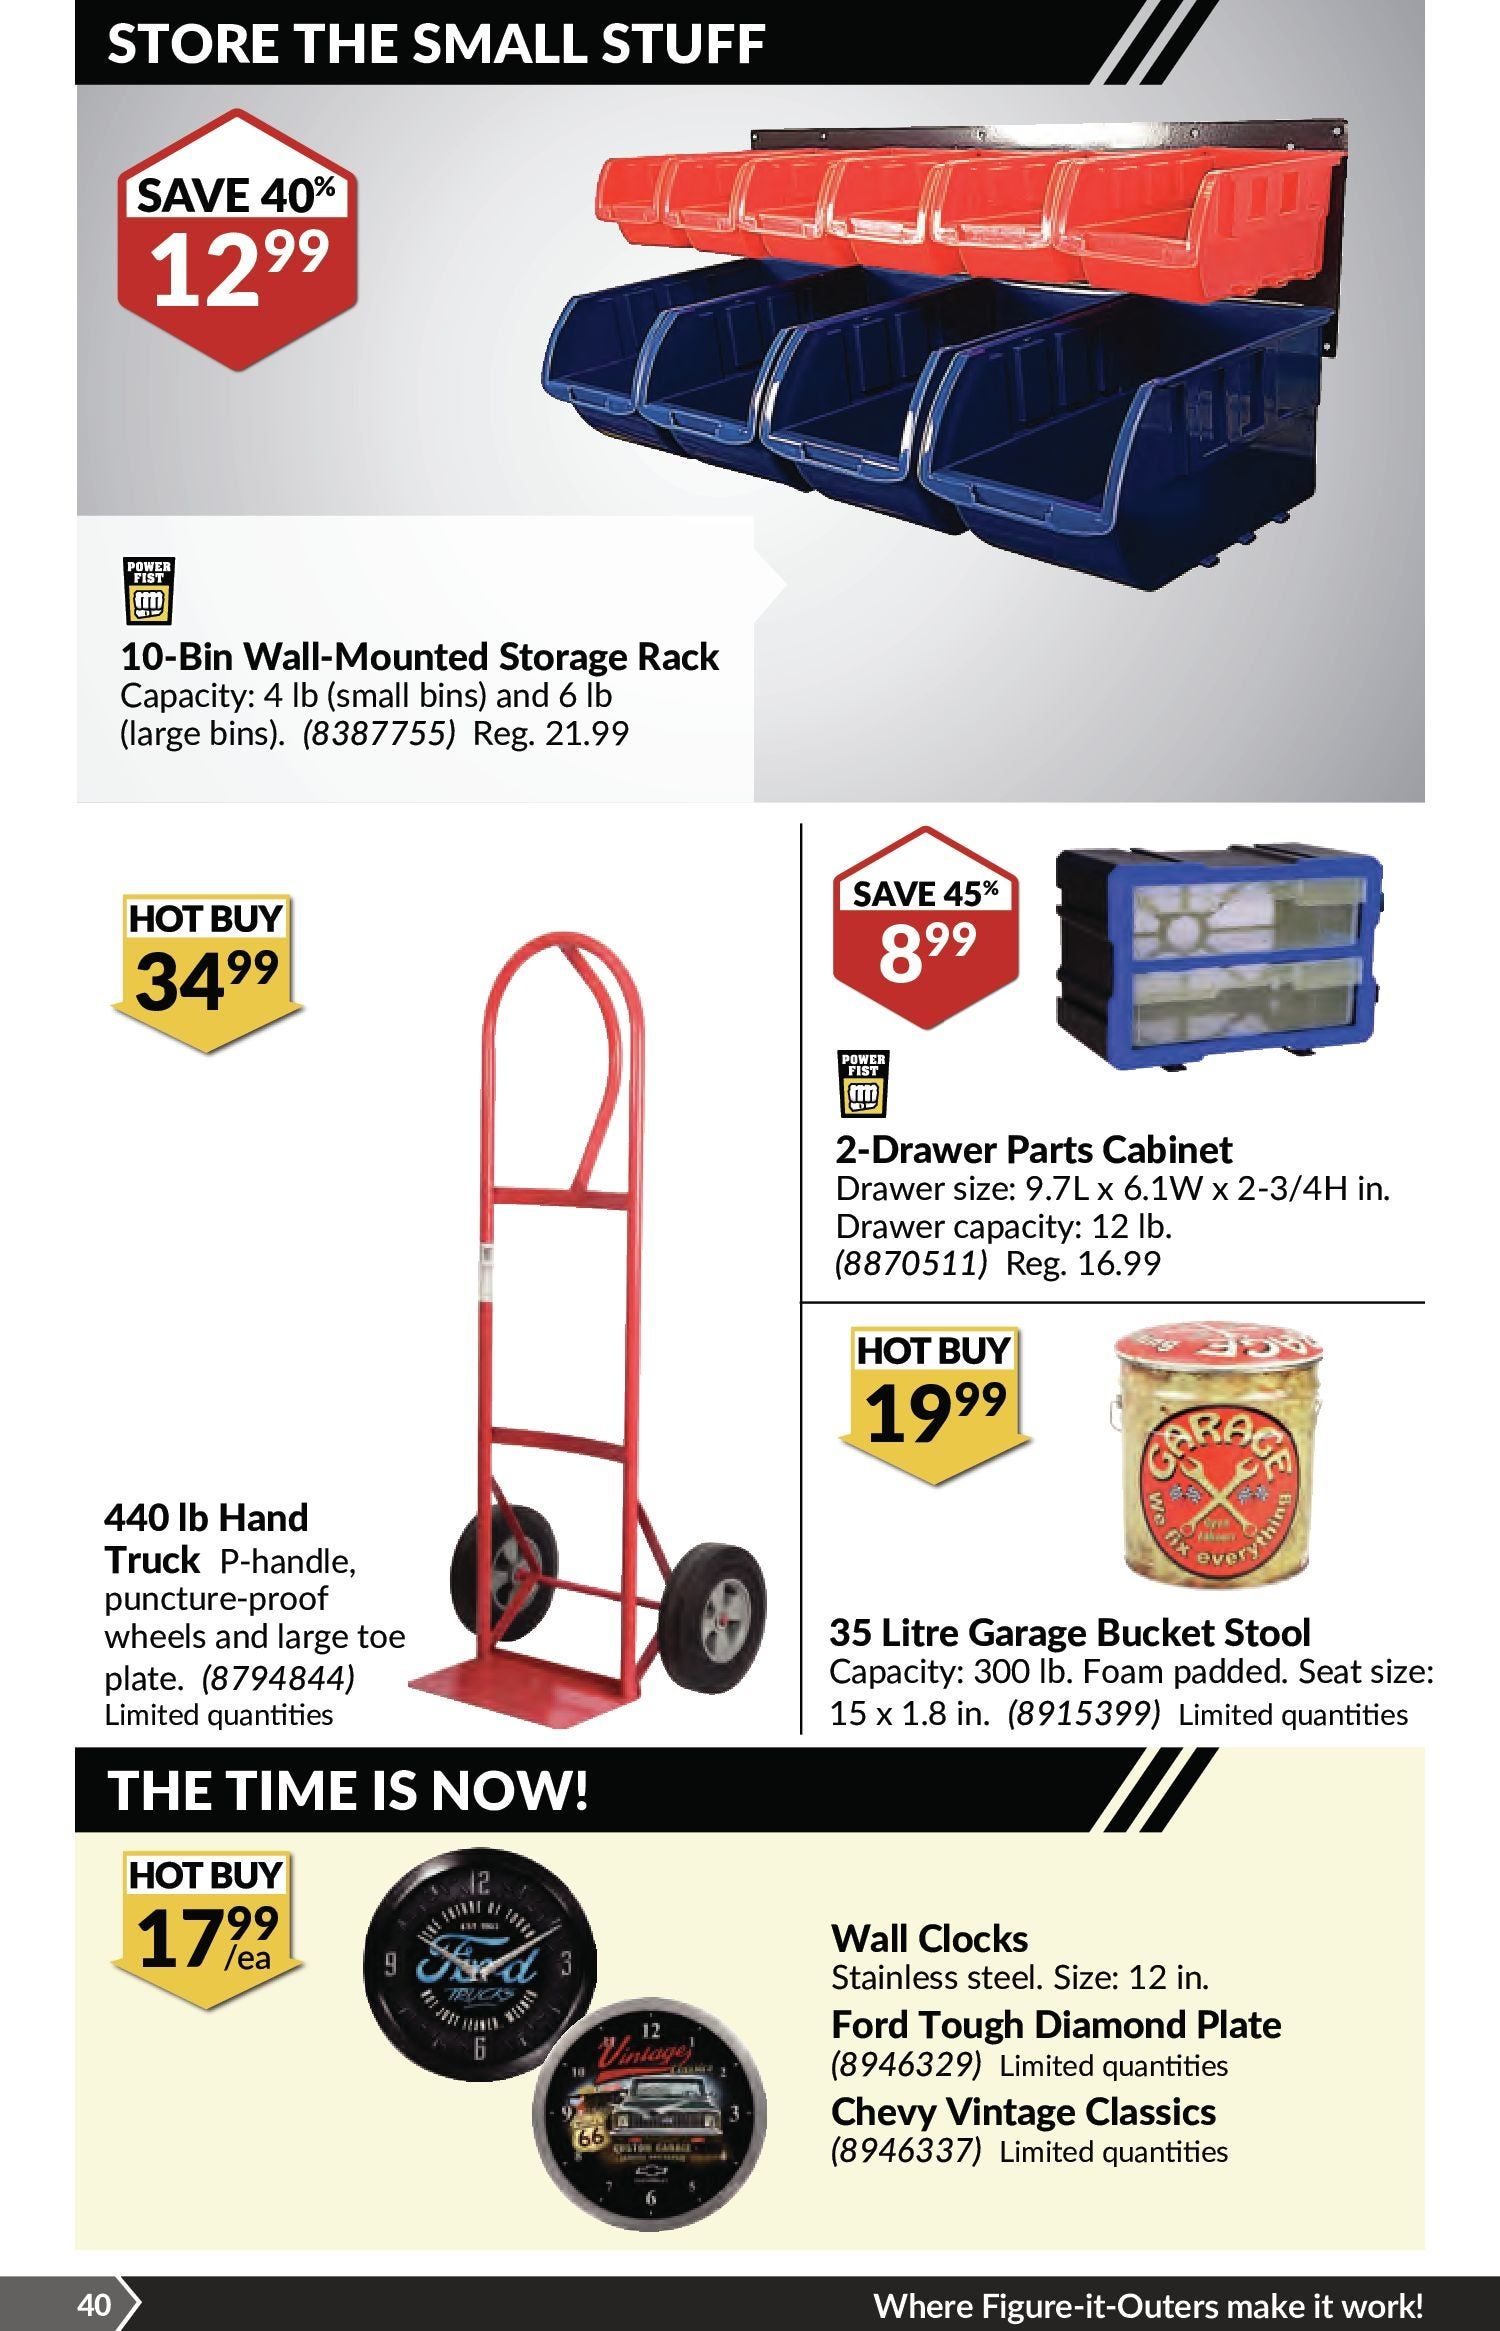 Princess Auto Weekly Flyer - 2 Week Sale - Mixing Up The Deals - Jul 6 – 18  